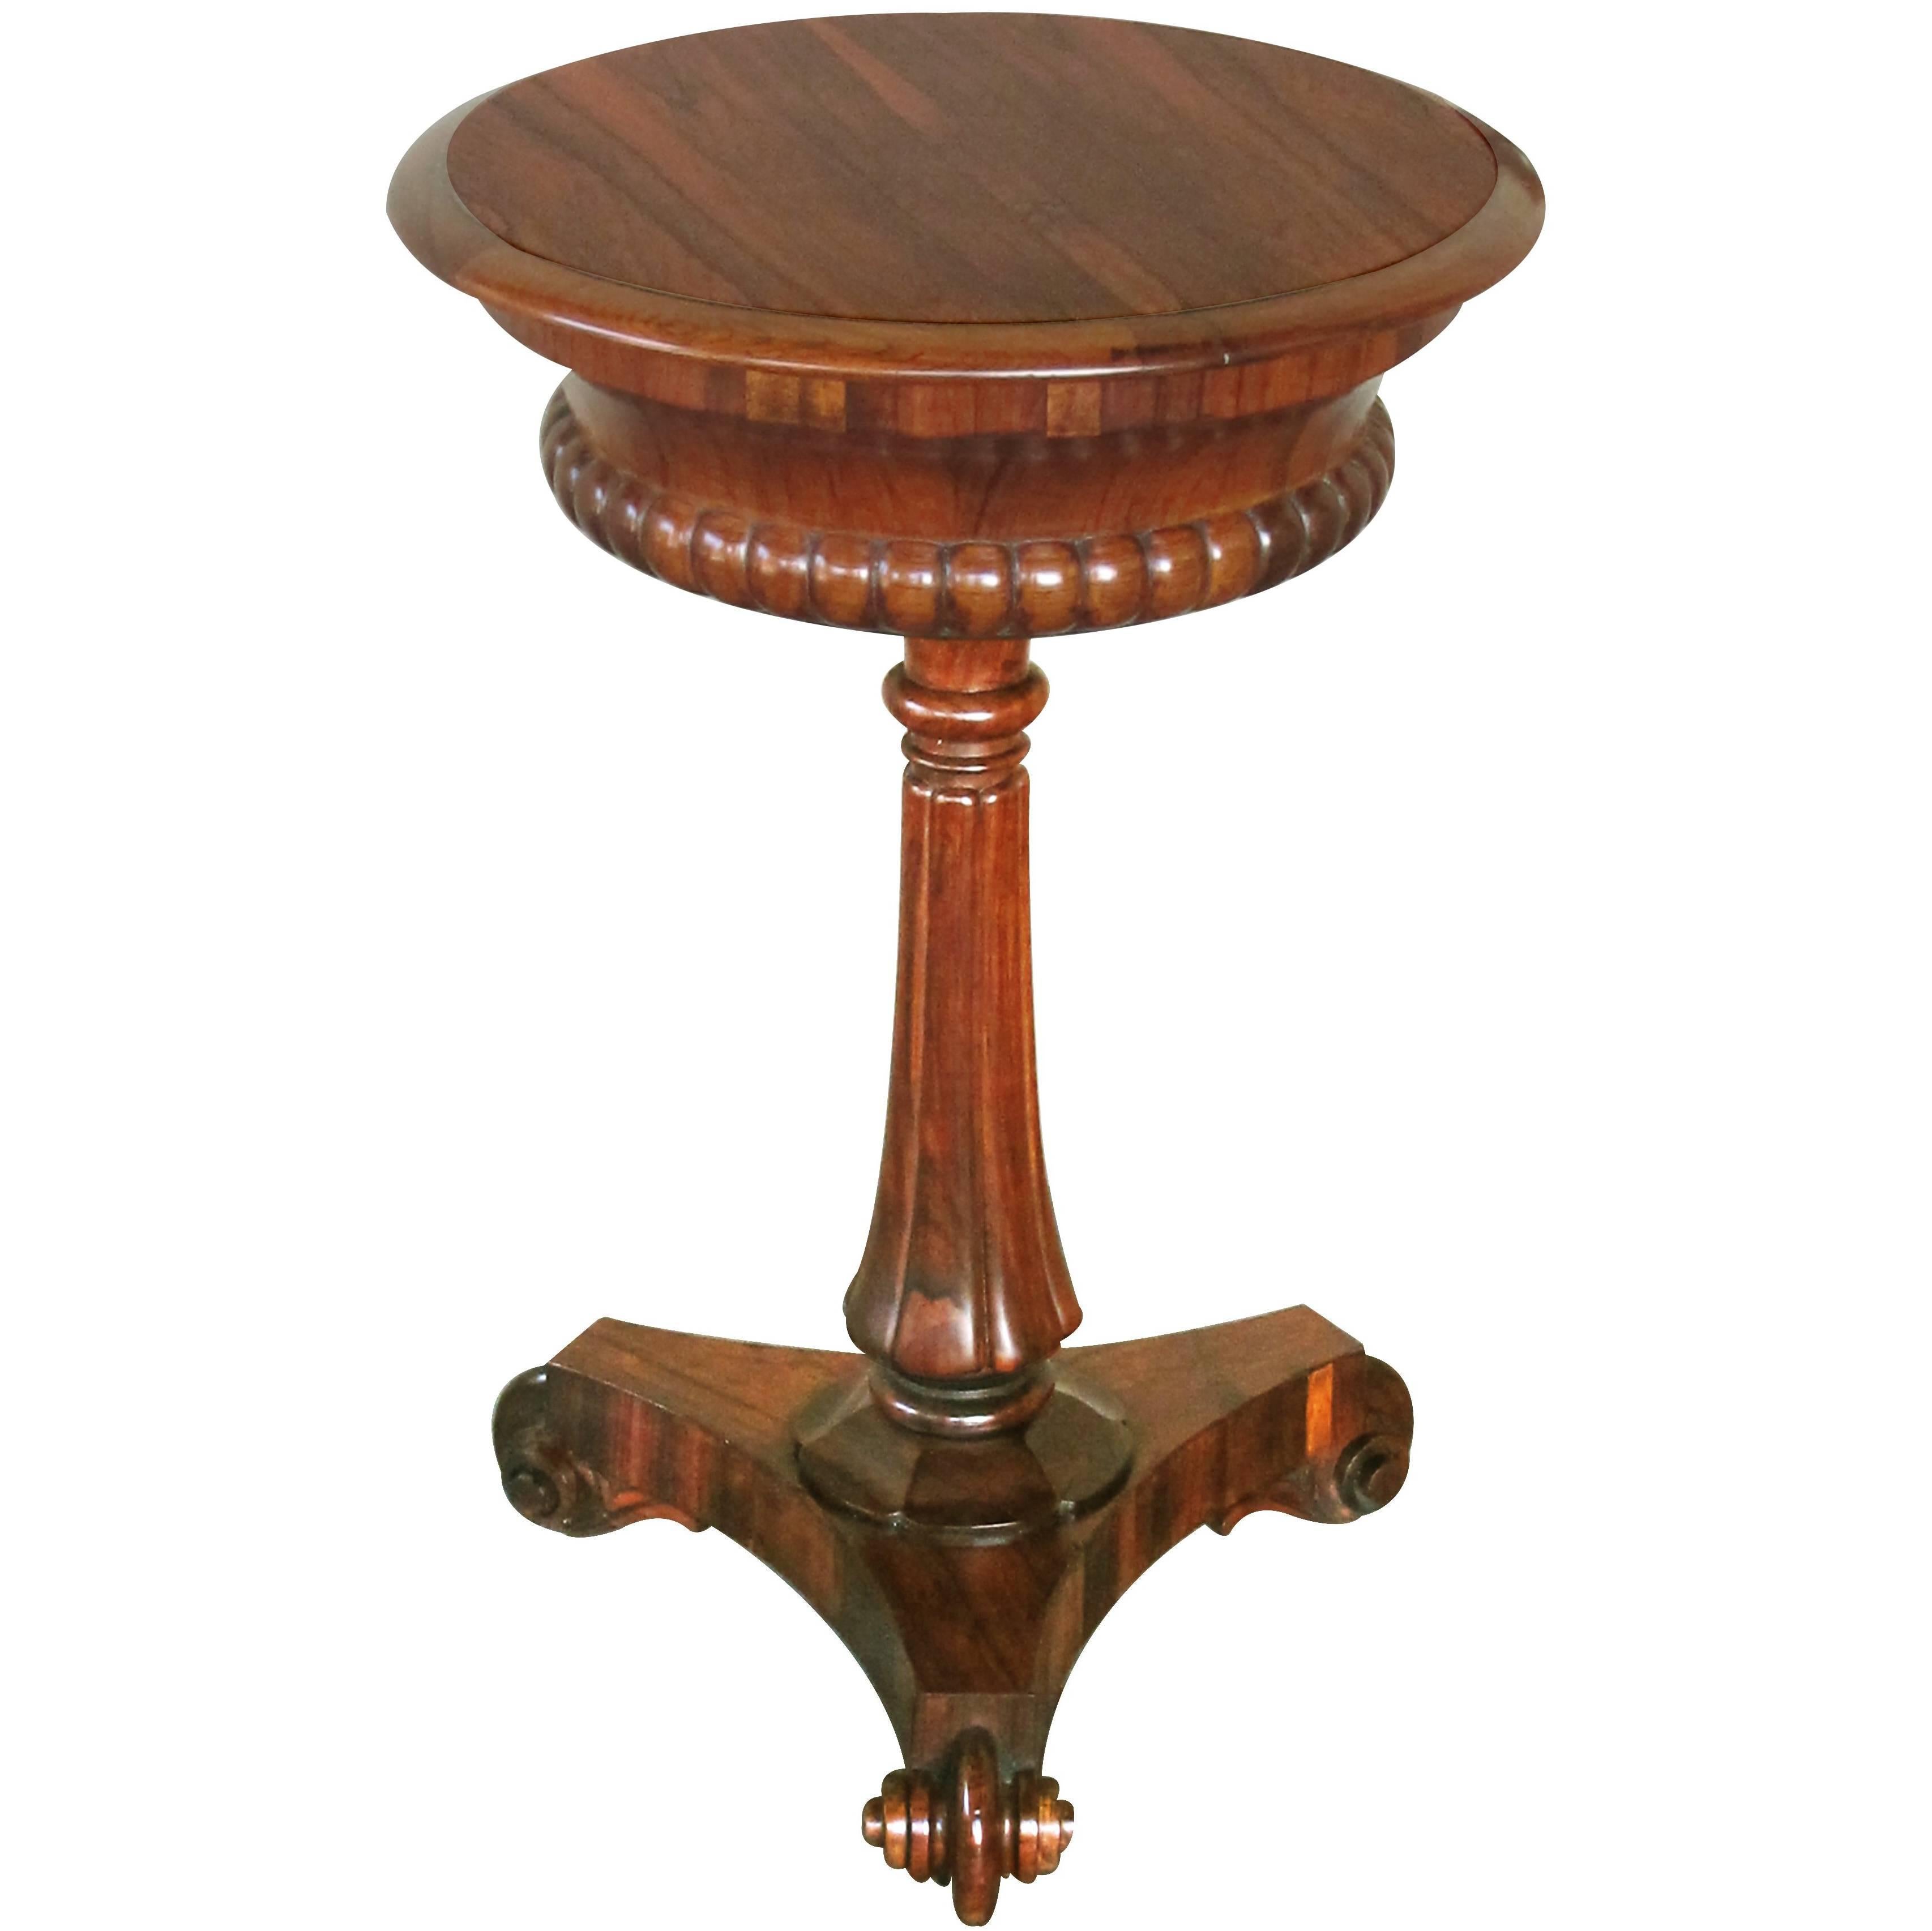 Handsome and Well-Figured English William IV Circular Rosewood Side Table